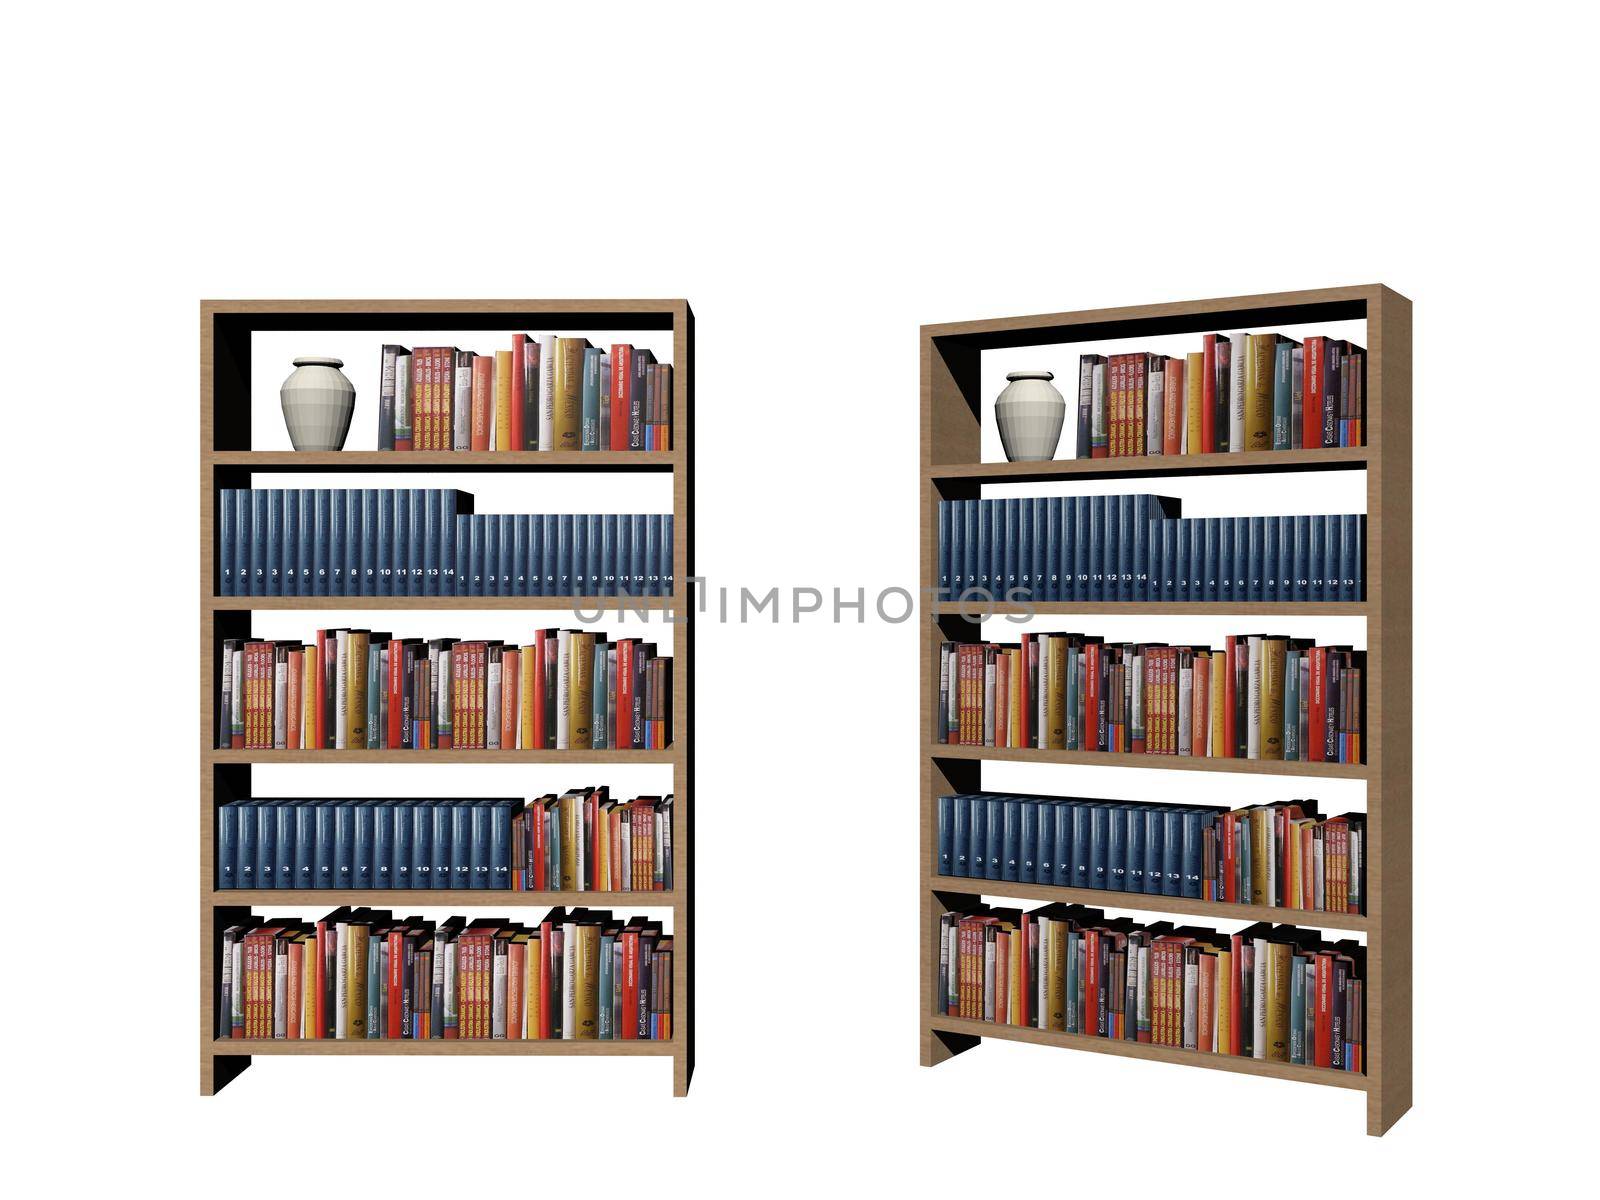 library book shelf background on a white background - 3d rendering by mariephotos